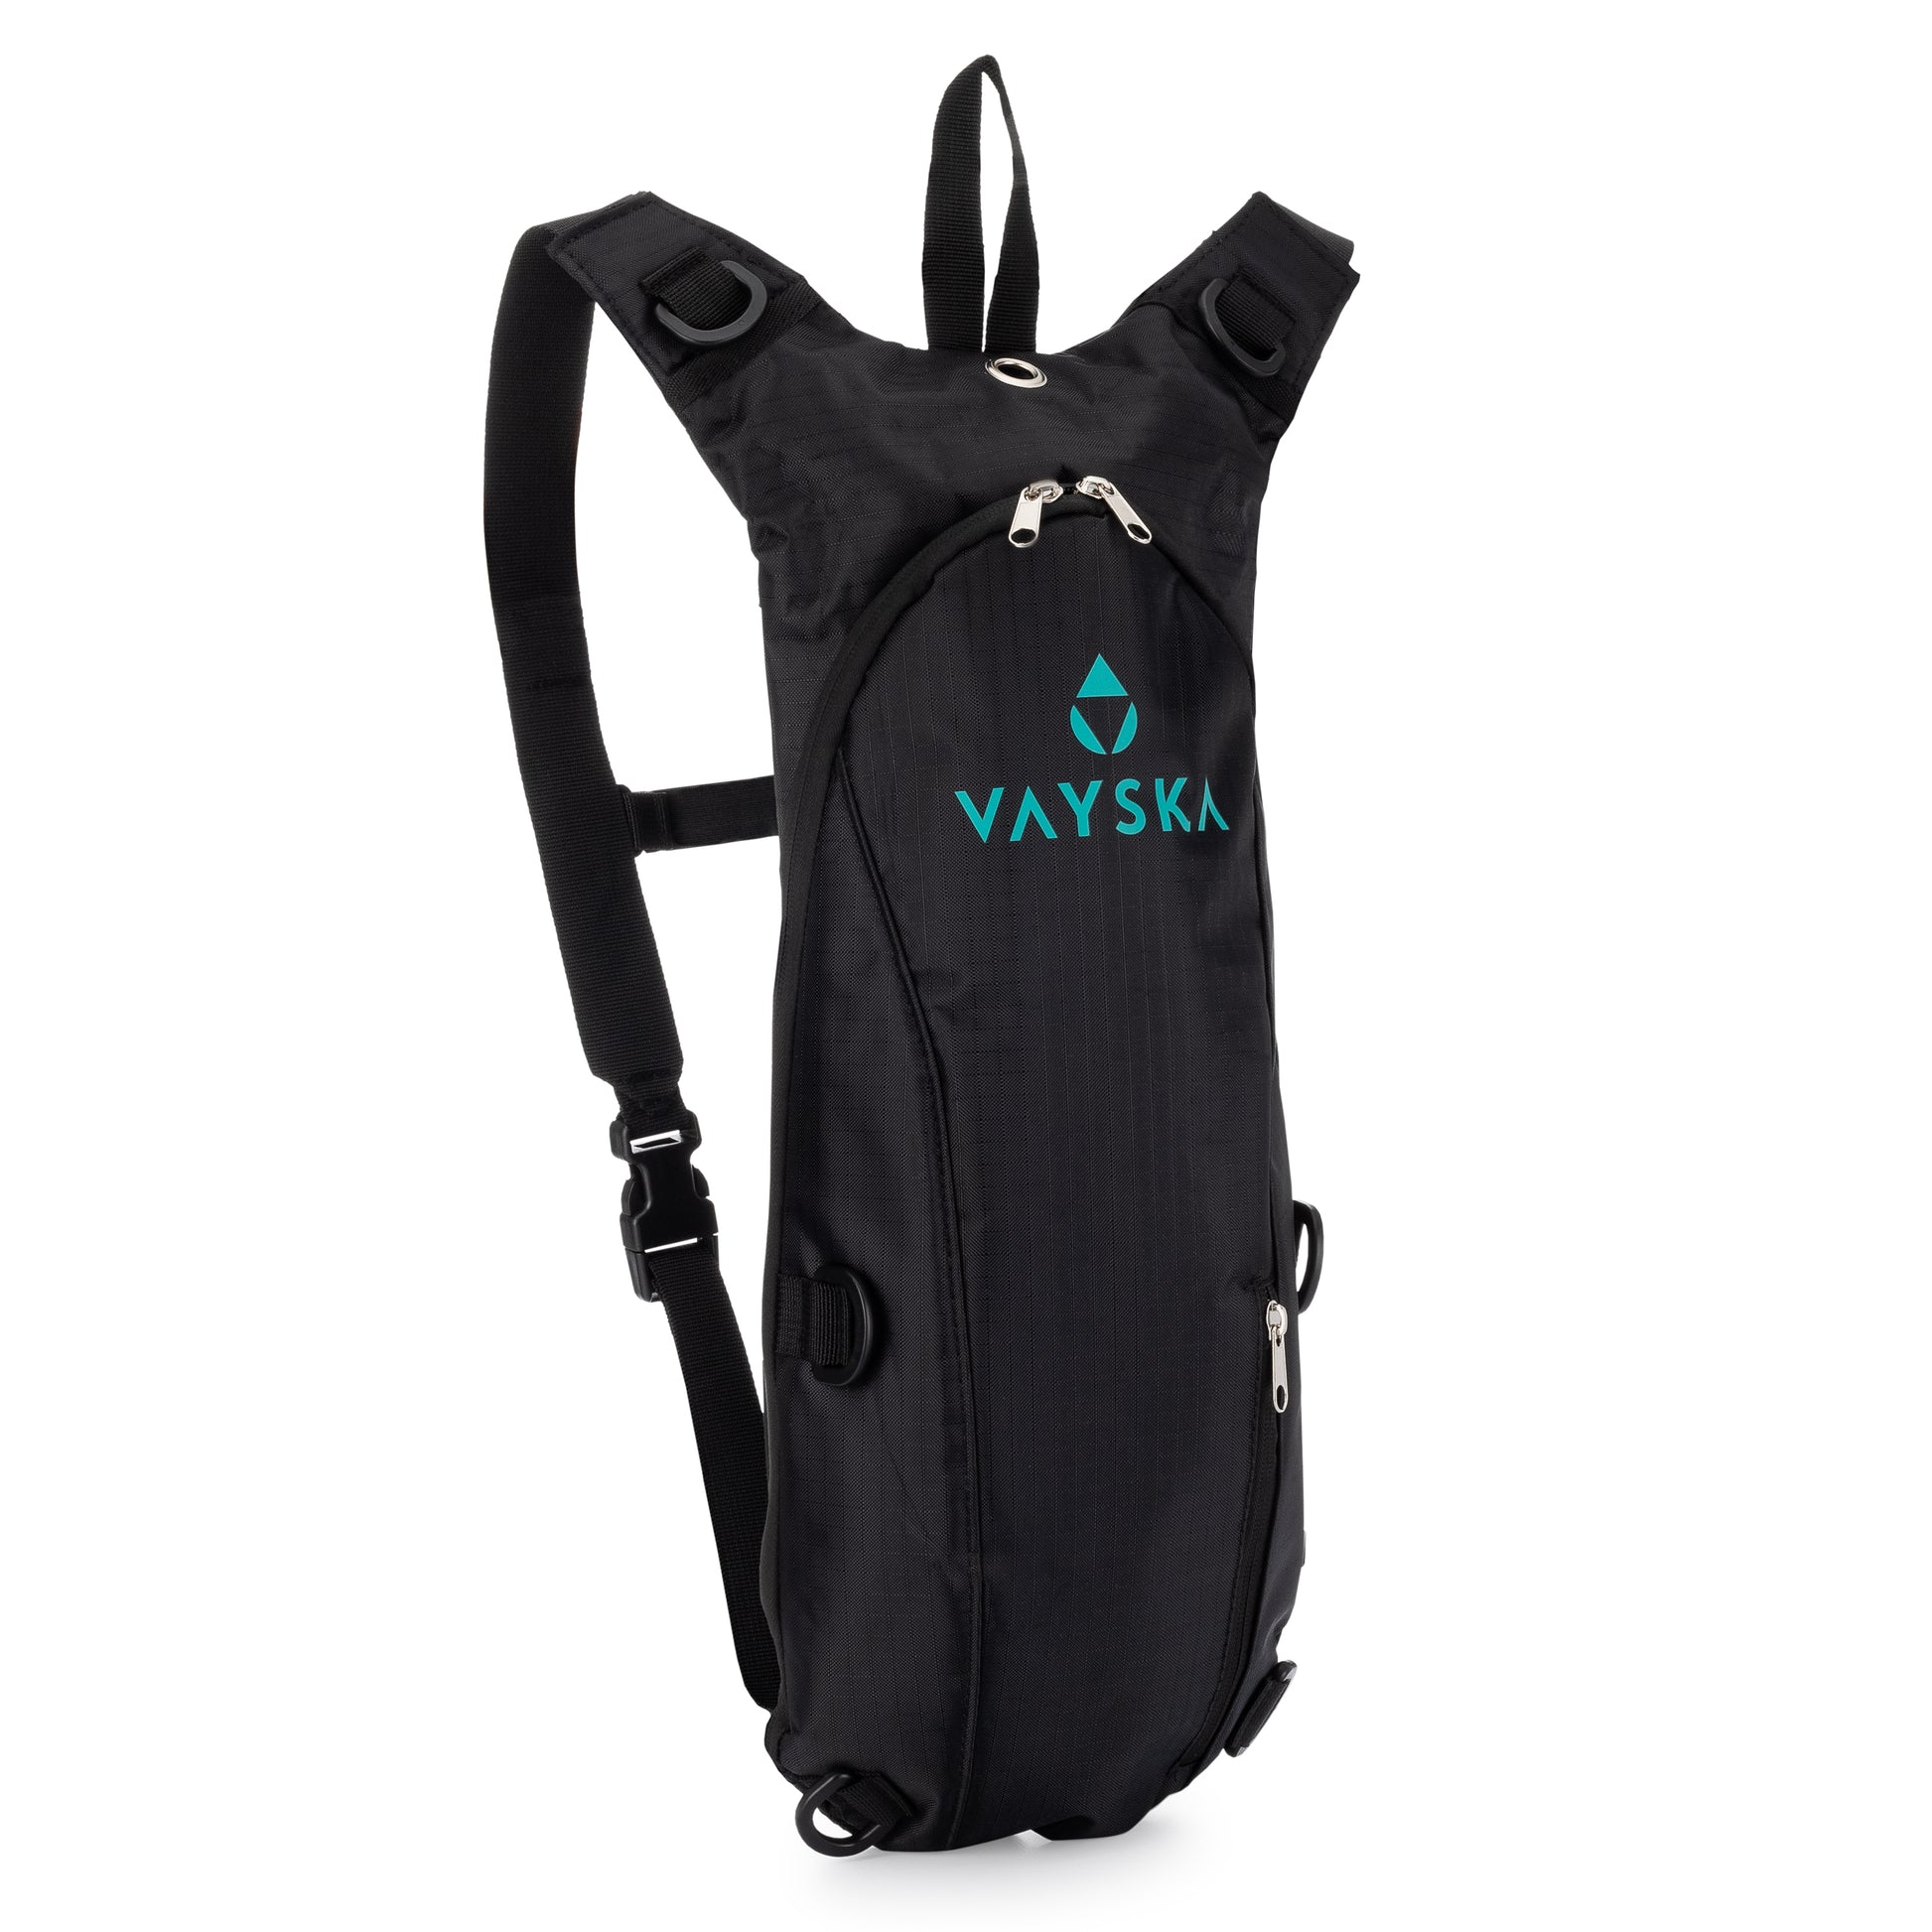 A black Vayska hydration pack with regular nylon straps on a white back ground. The background is boring, but the pack is awesome!